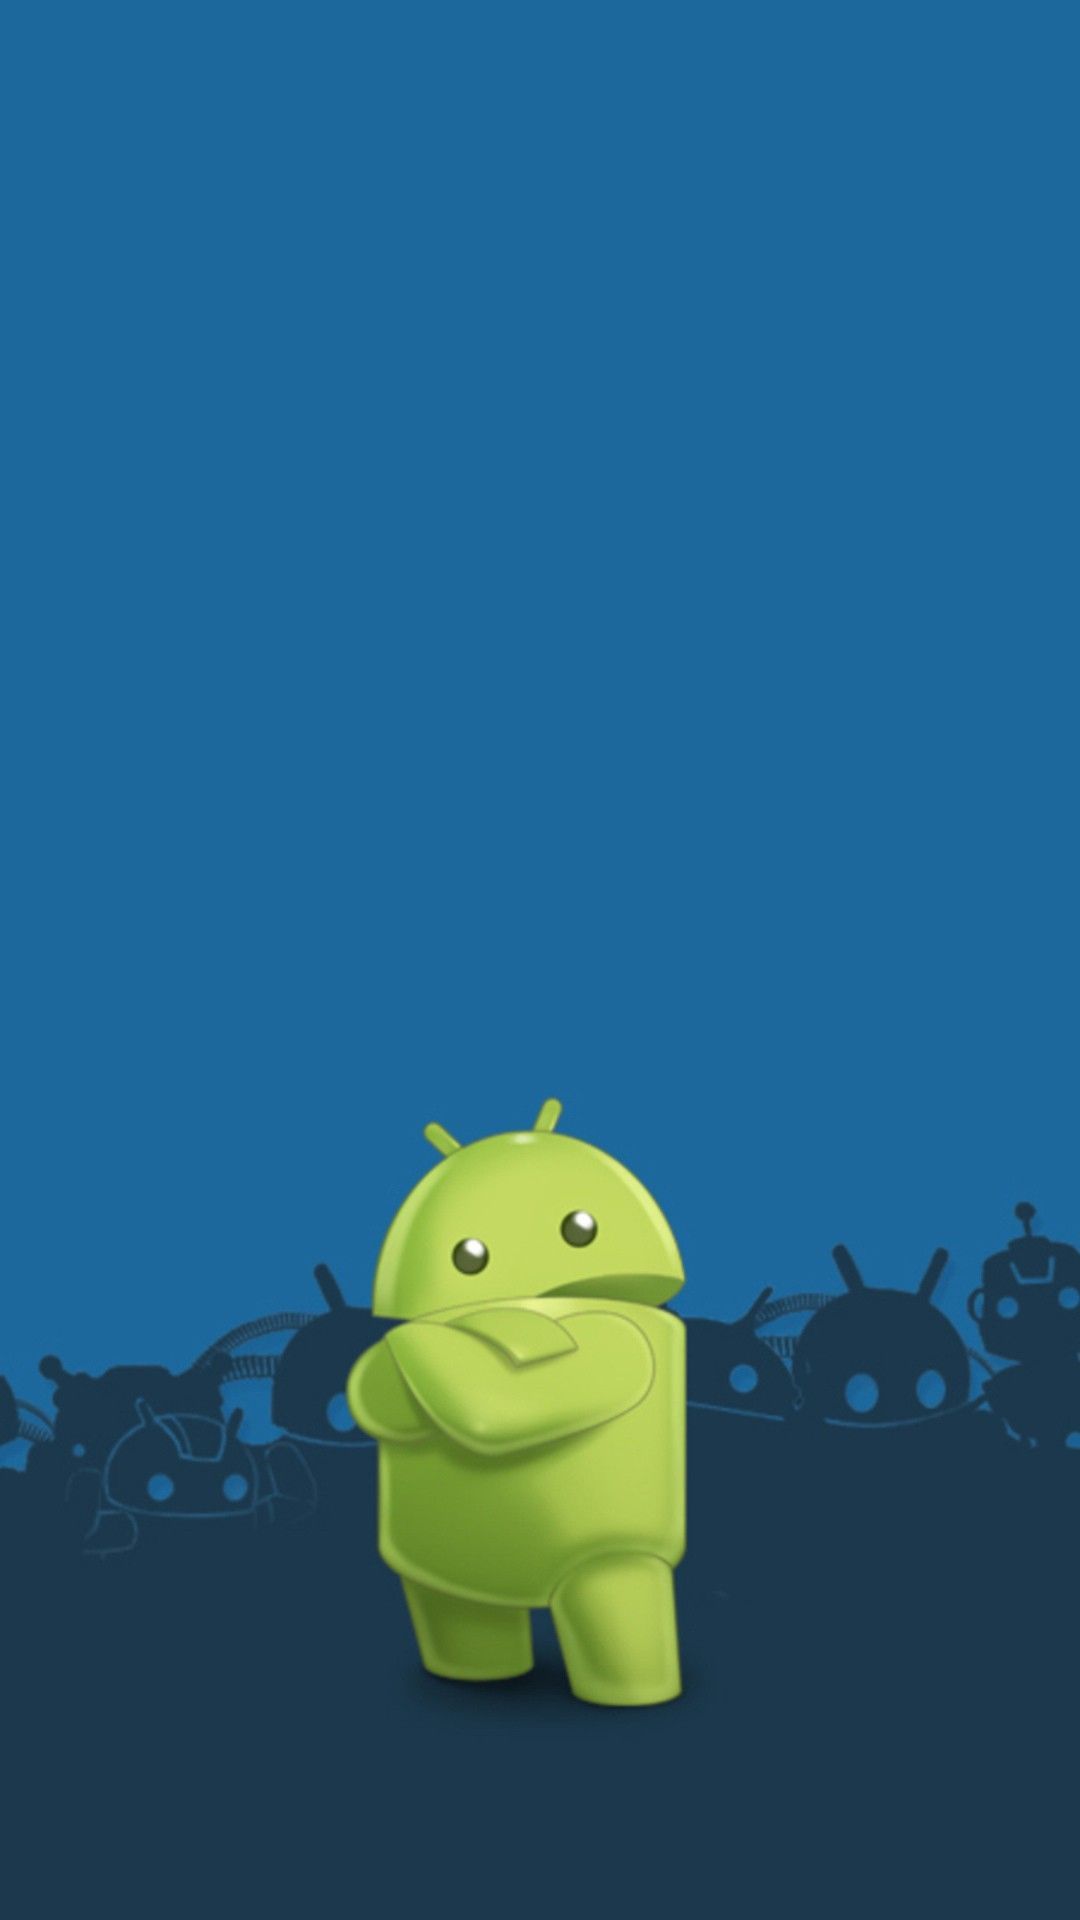 Cool Android Wallpaper On